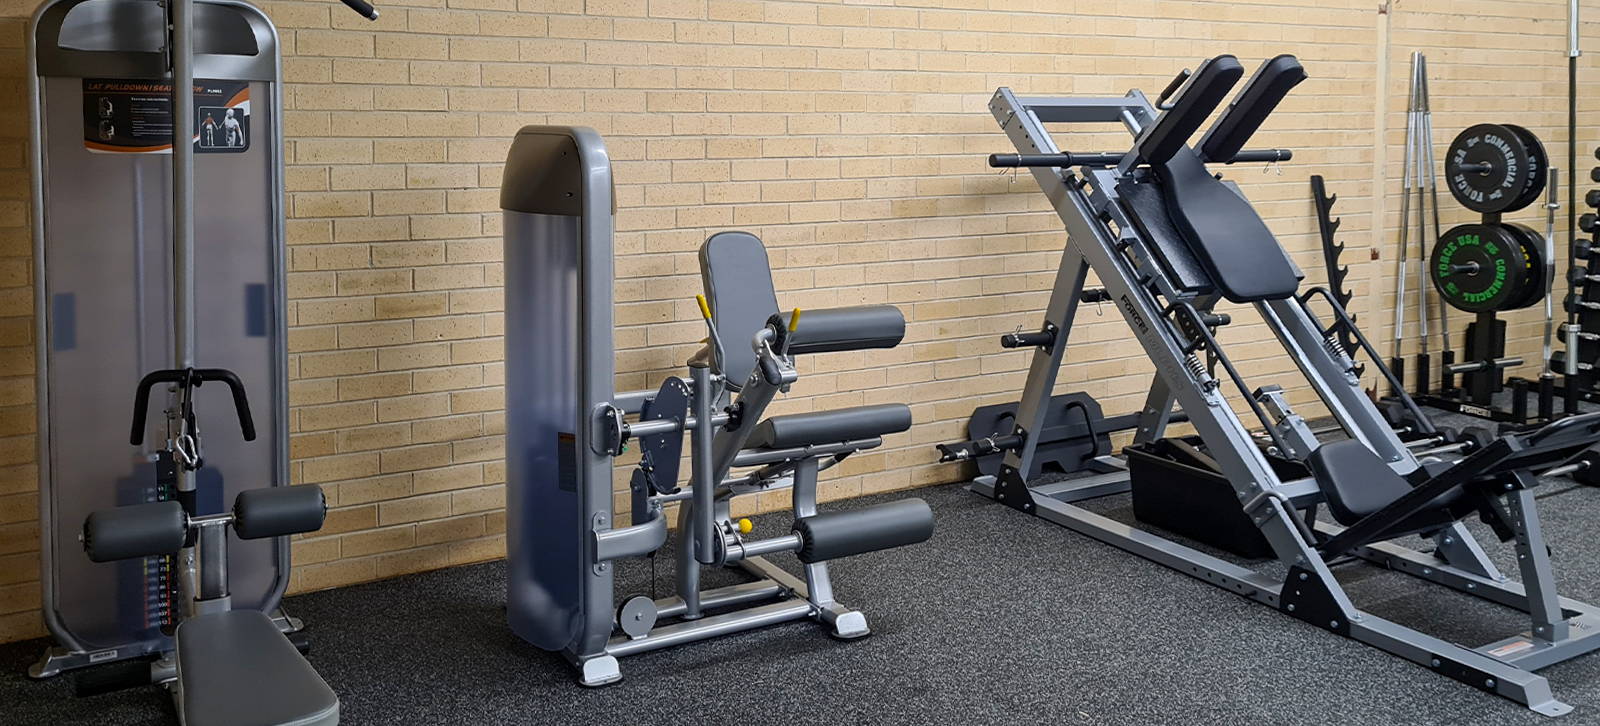 High School Gym School Fit Out Enhance athletic performance at your high school with our tailored gym fit-out services. From strength training to cardio zones, we offer solutions that cater to all abilities